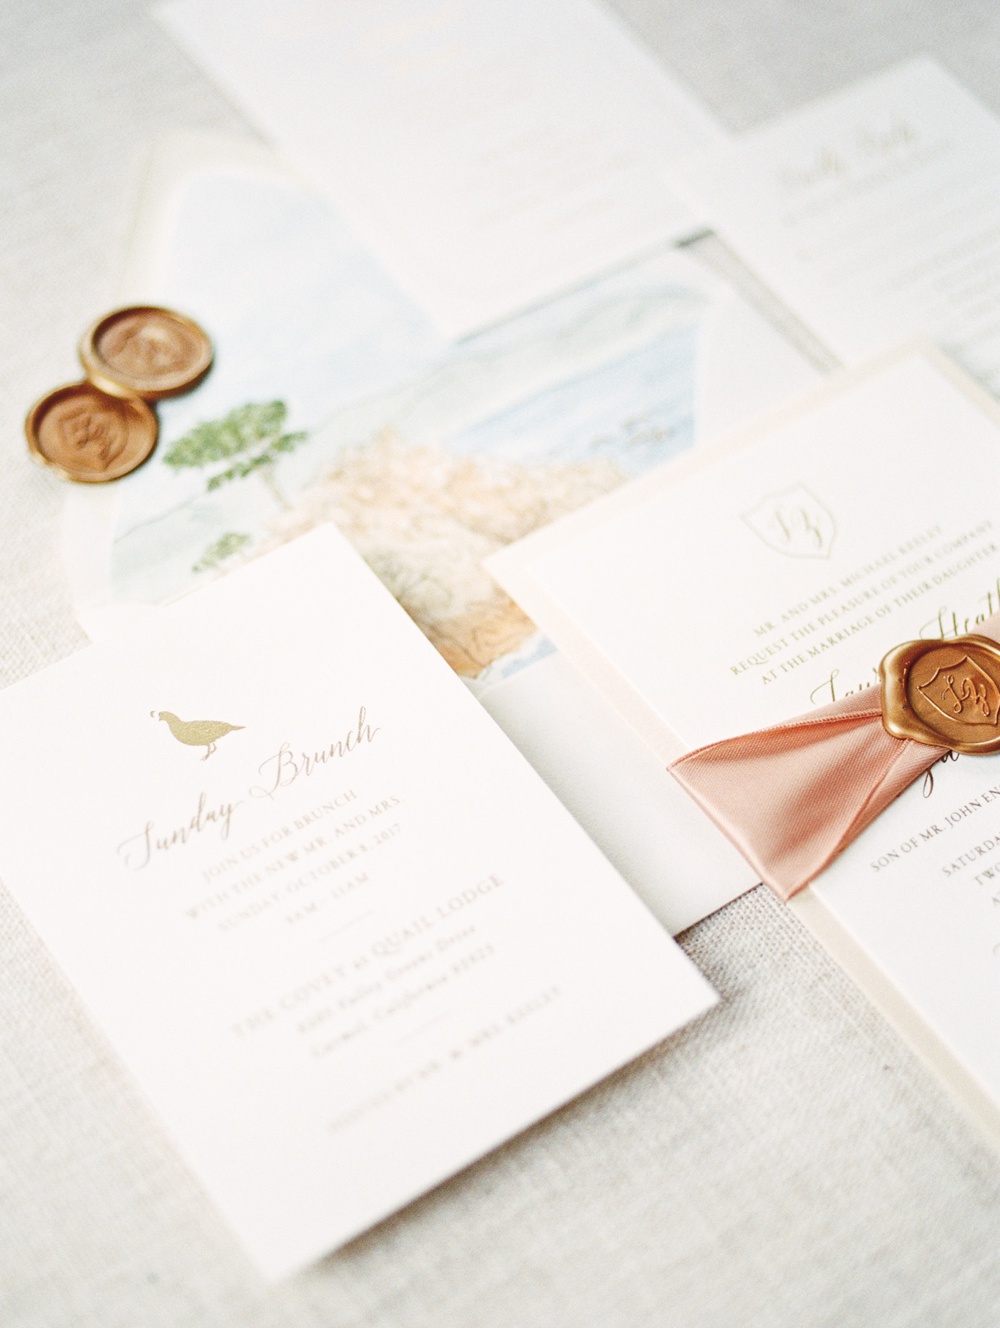 Luxury Stationary Designer Blush and watercolor suite